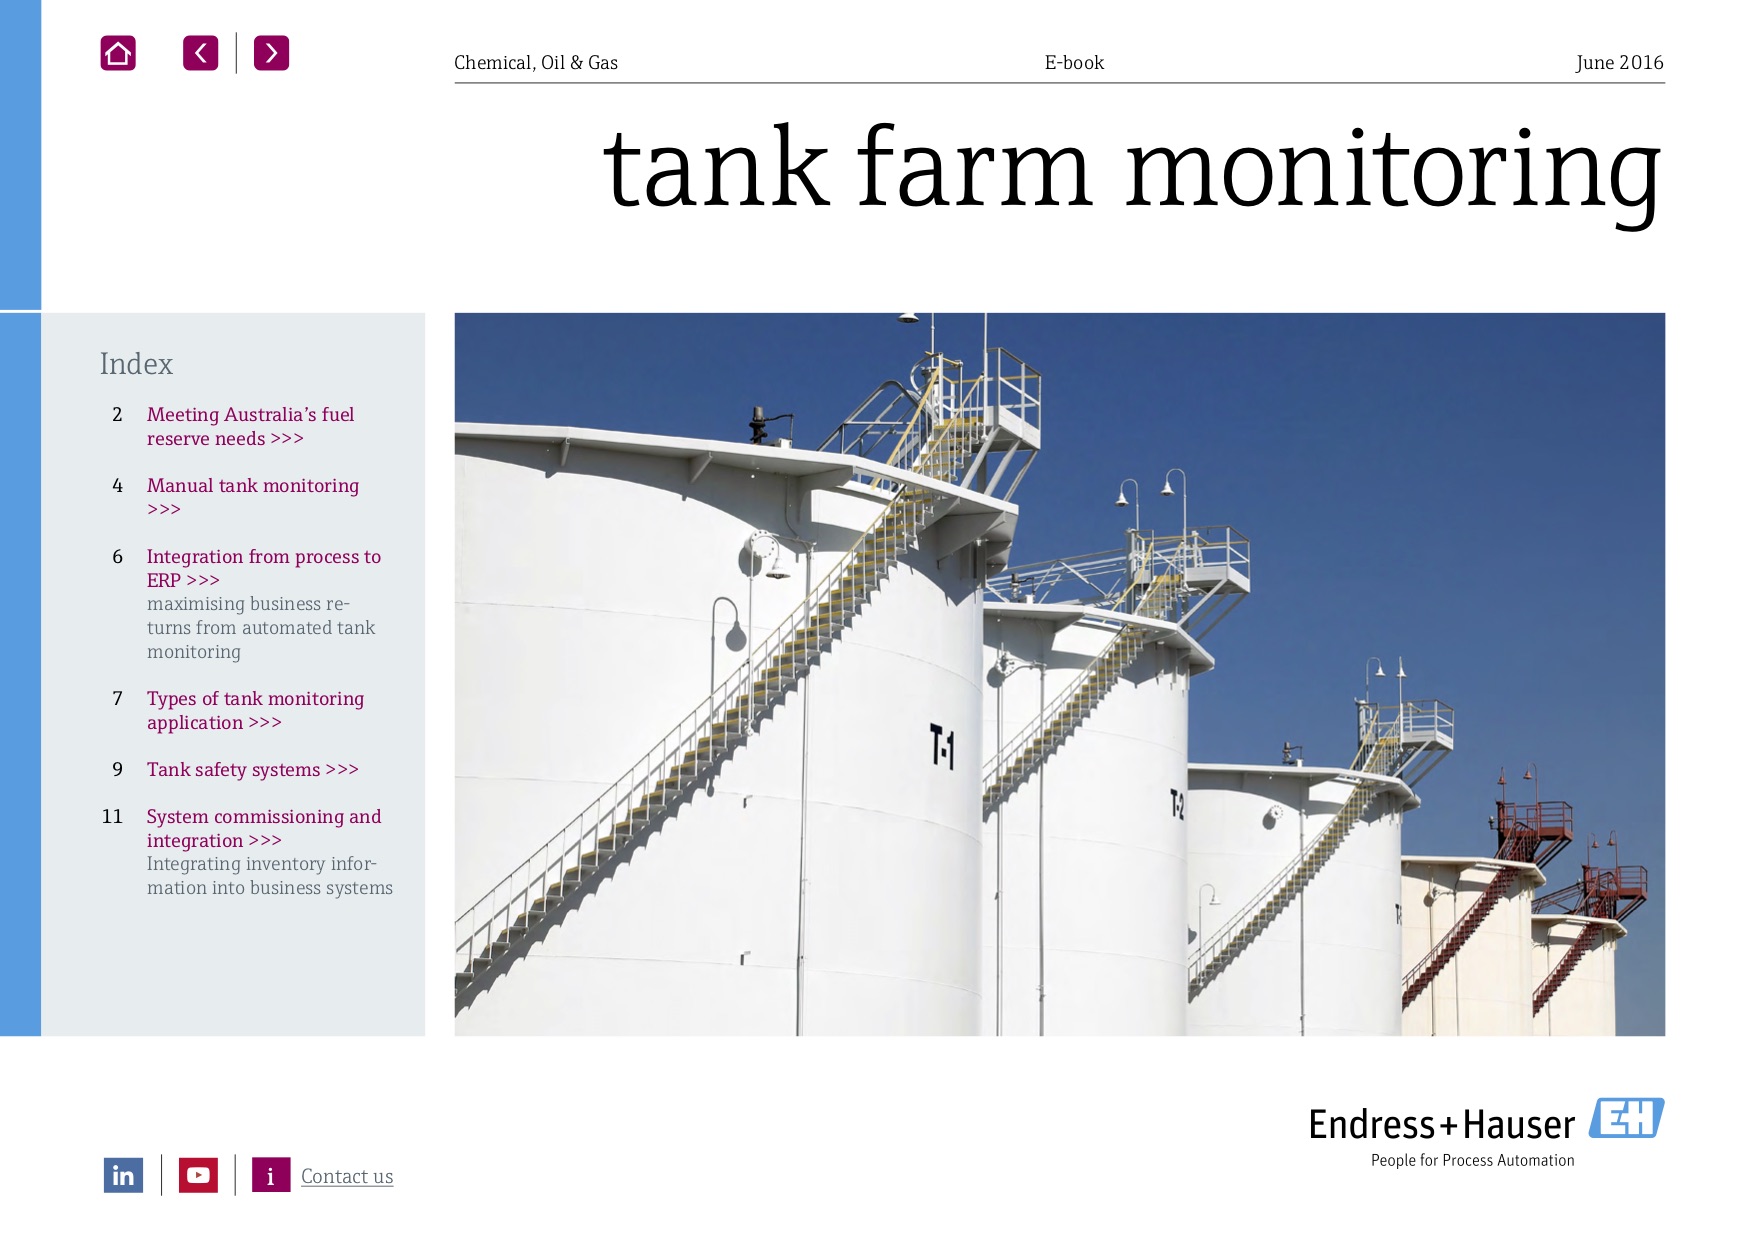 Tank Farm Monitoring: Meeting Australia’s IEA treaty obligations will require automated tank farm monitoring and inventory management.